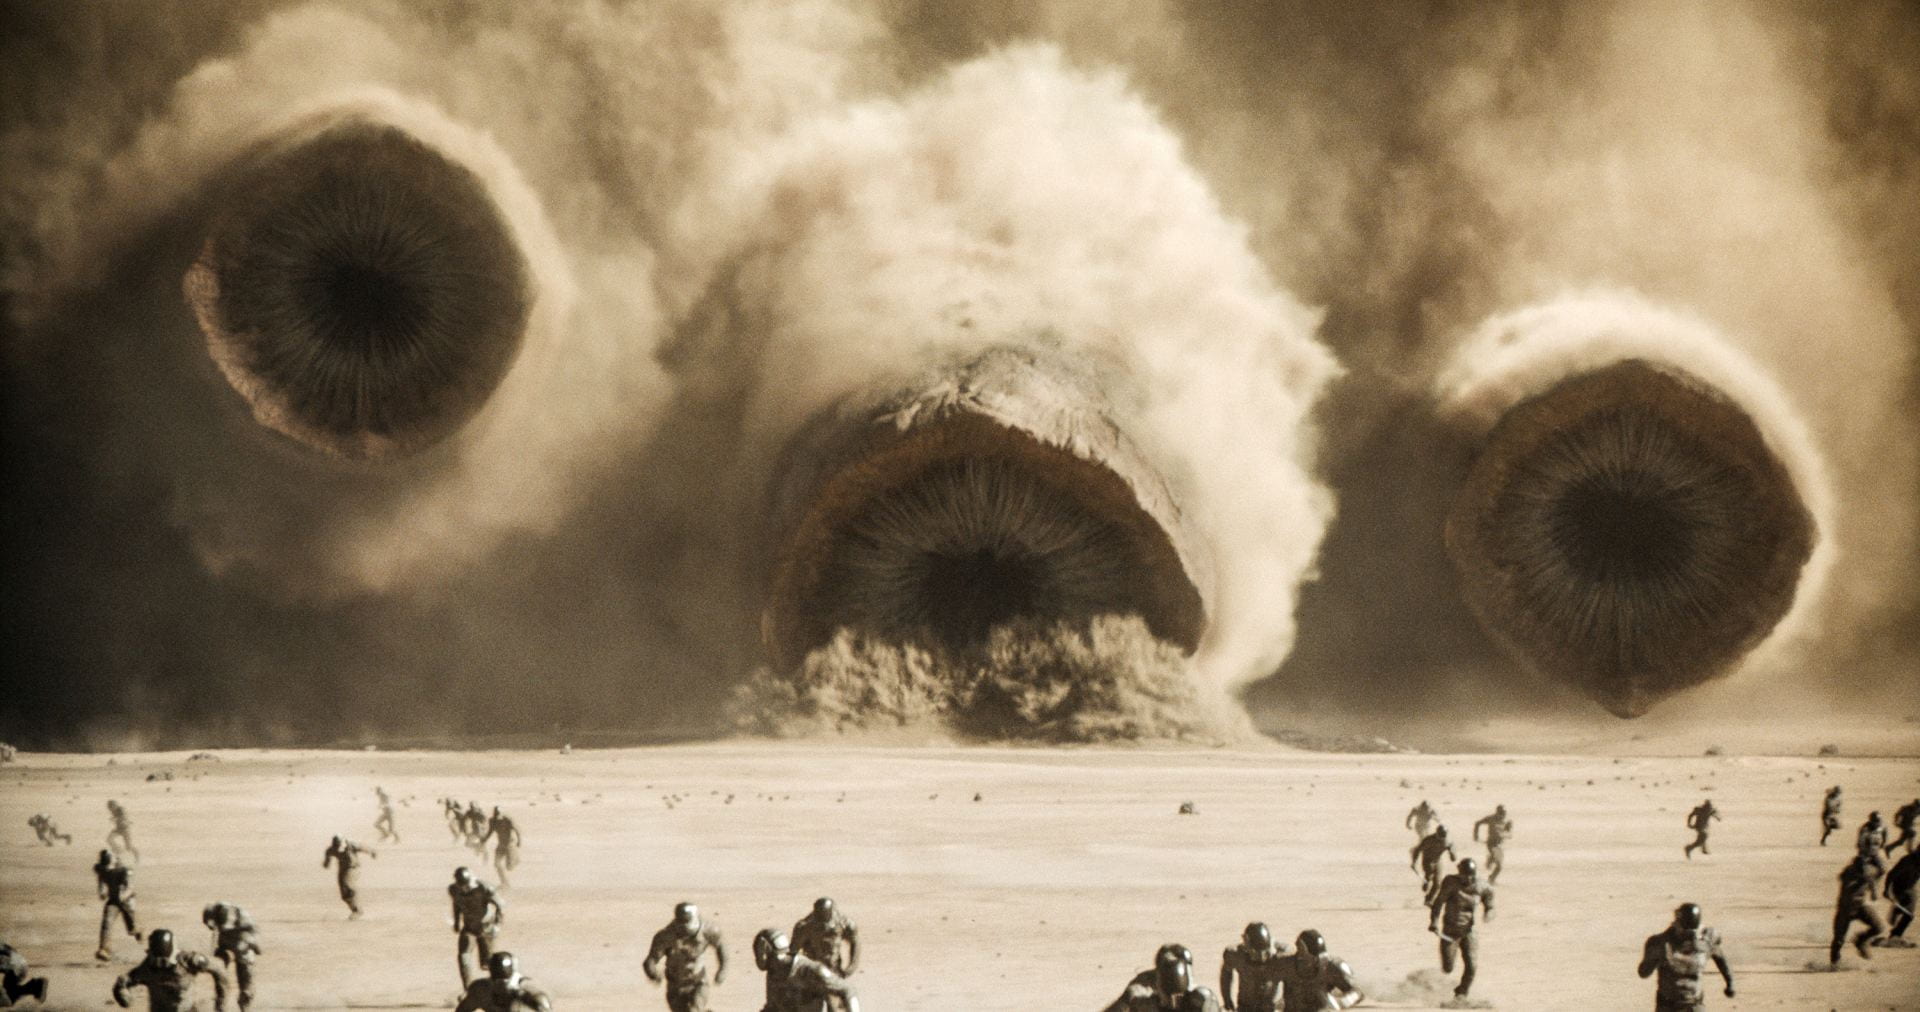 The giant sandworms of the planet Arrakis are an even bigger presence in "Dune: Part Two" than they were in 2021's "Dune." Credit: Courtesy Warner Bros. Pictures (via TNS)